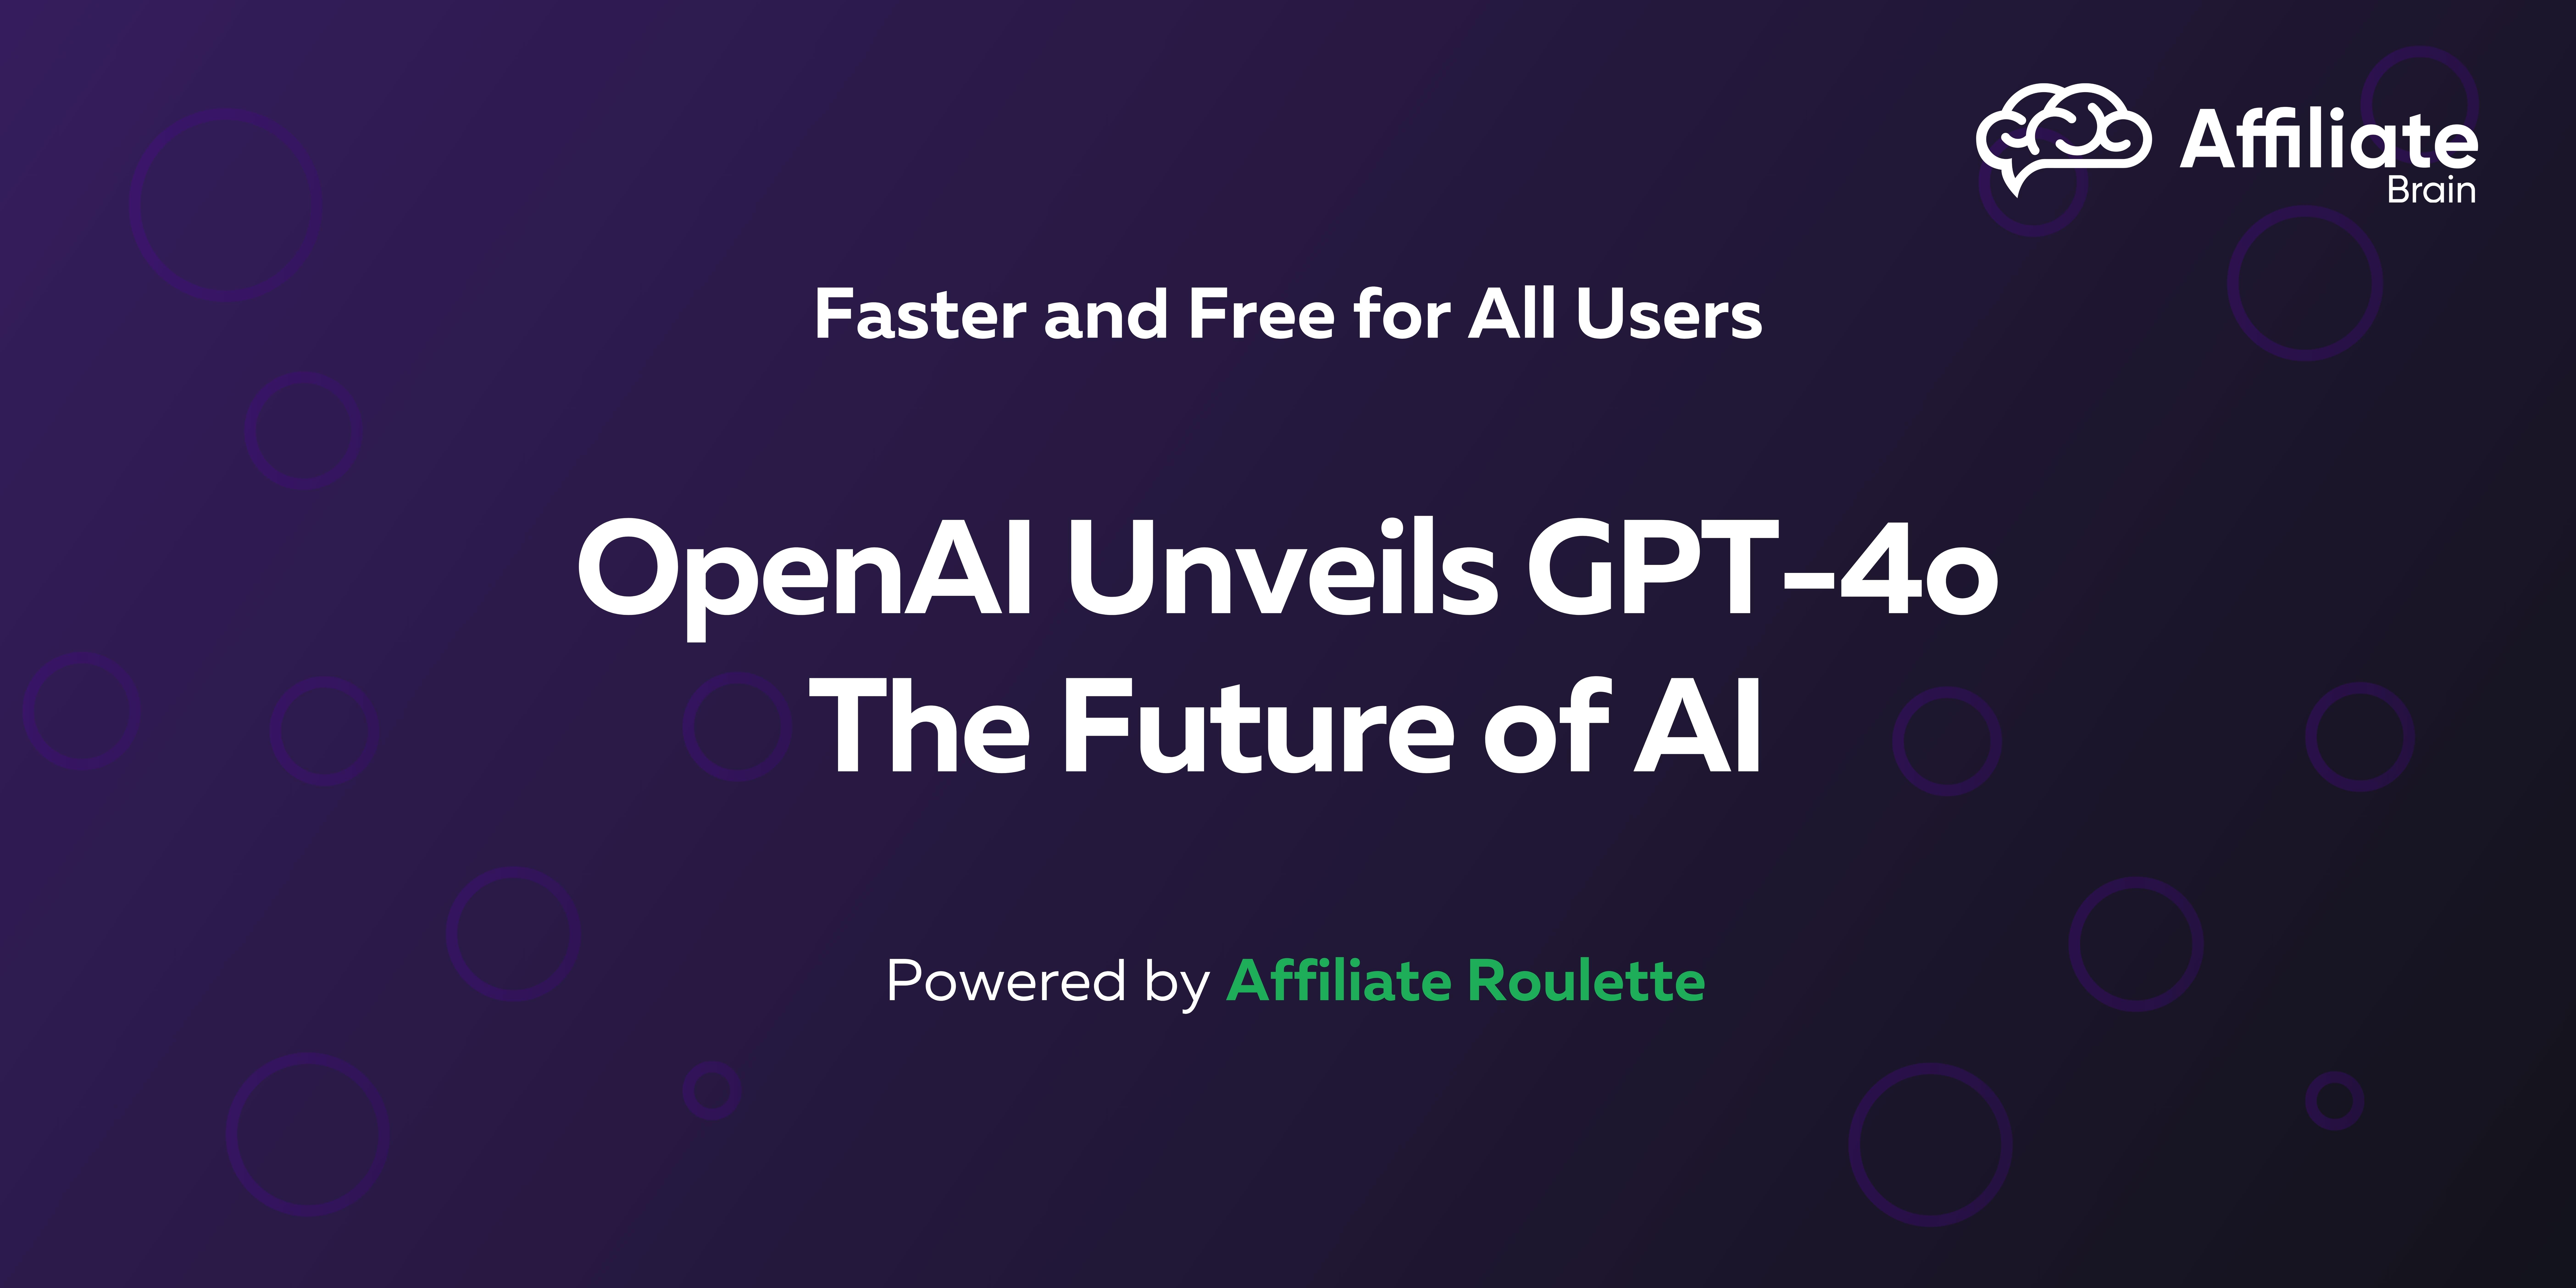 OpenAI Unveils GPT-4o: The Future of AI Interaction – Faster and Free for All Users